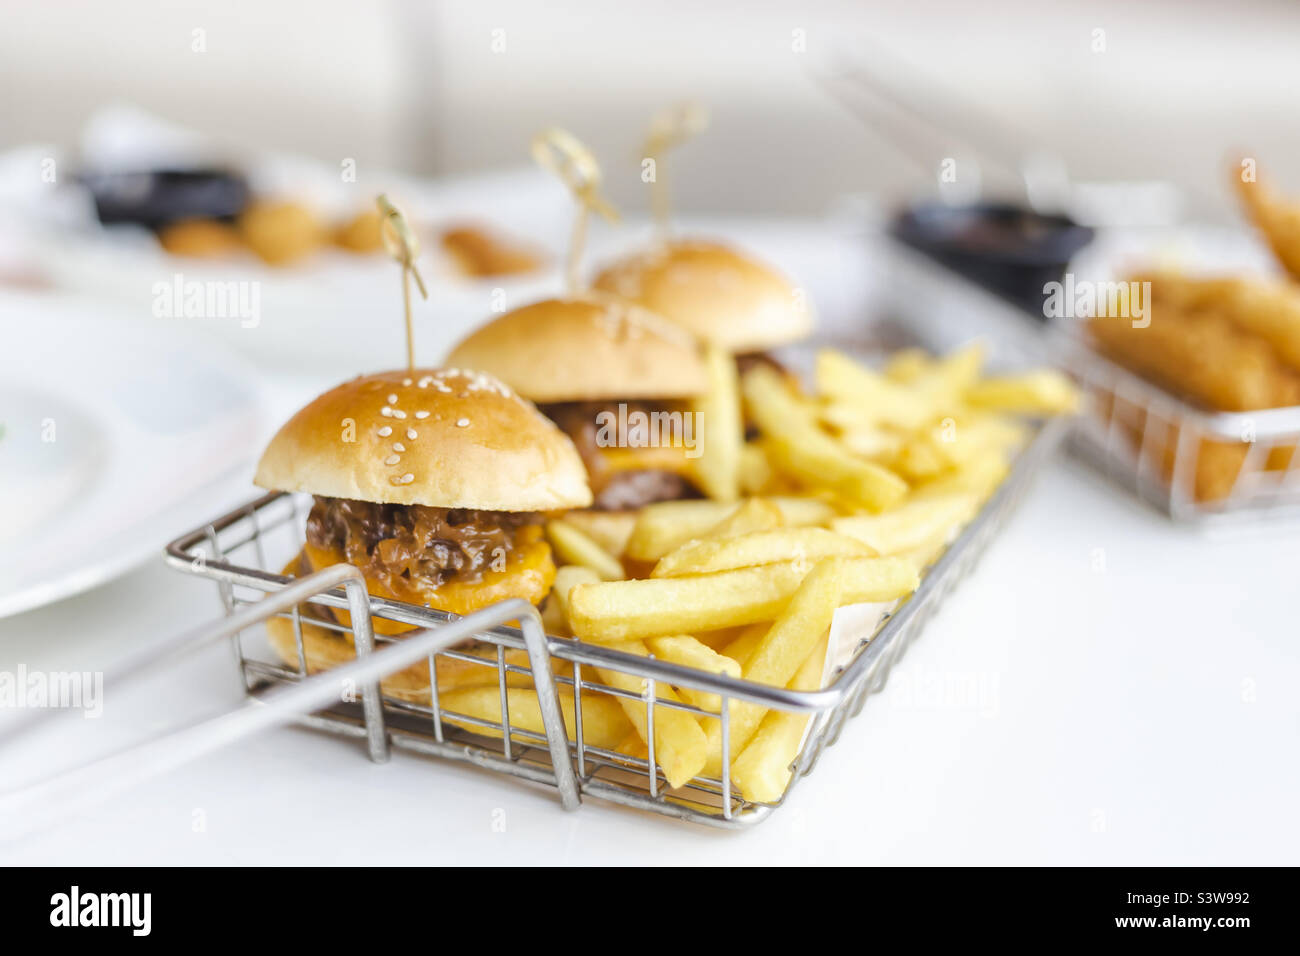 Mini burgers with French fries, snack at the bar Stock Photo